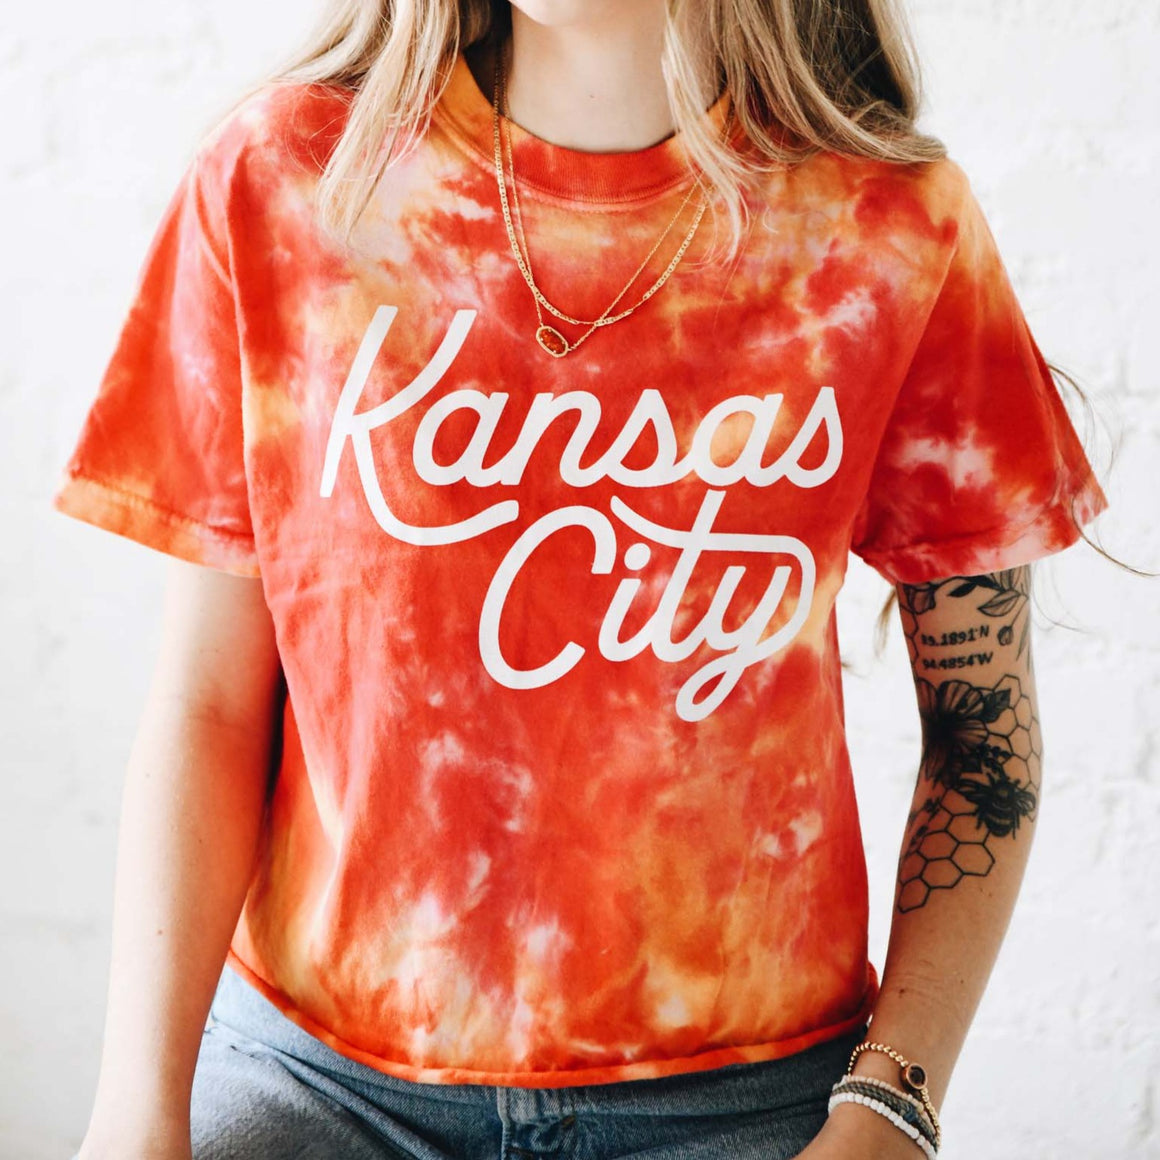 Kansas City Script Cropped T-Shirt - Red and Yellow Tie Dye